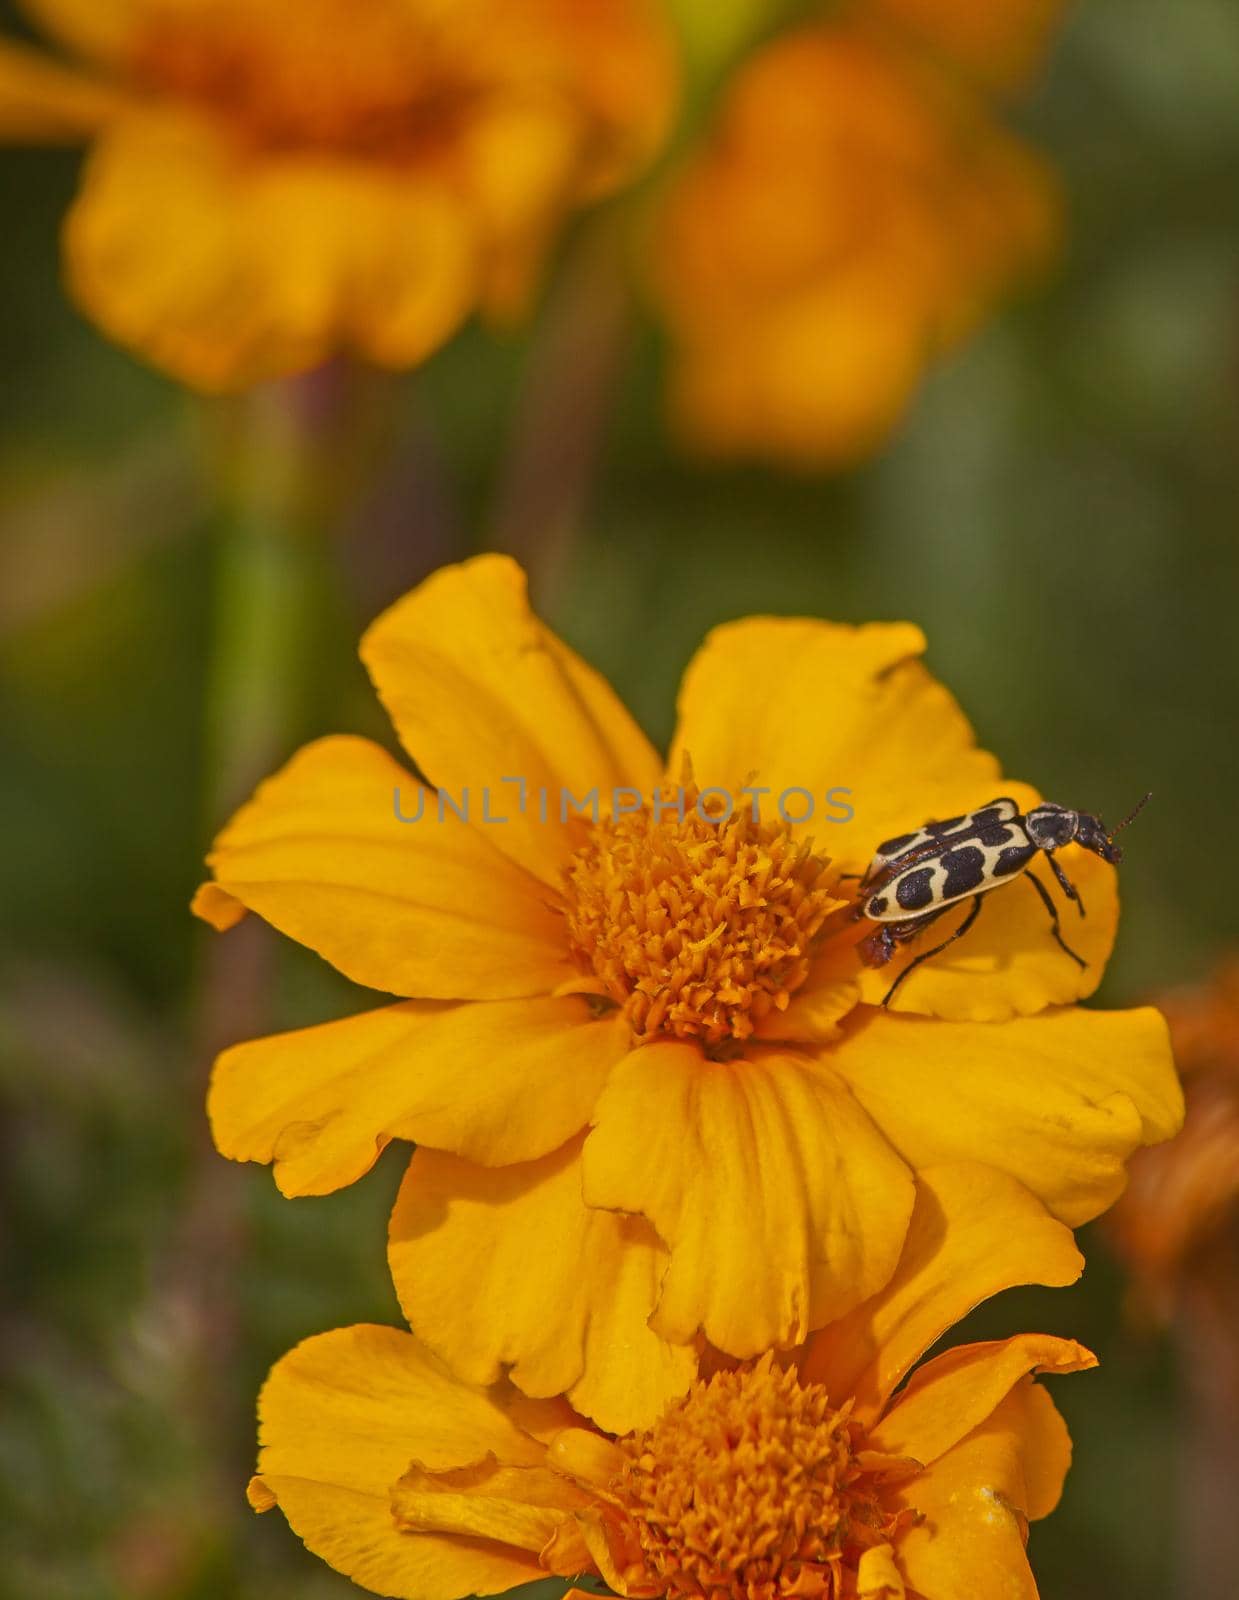 African Marigold with Spotted Maize Beetle 9336 by kobus_peche